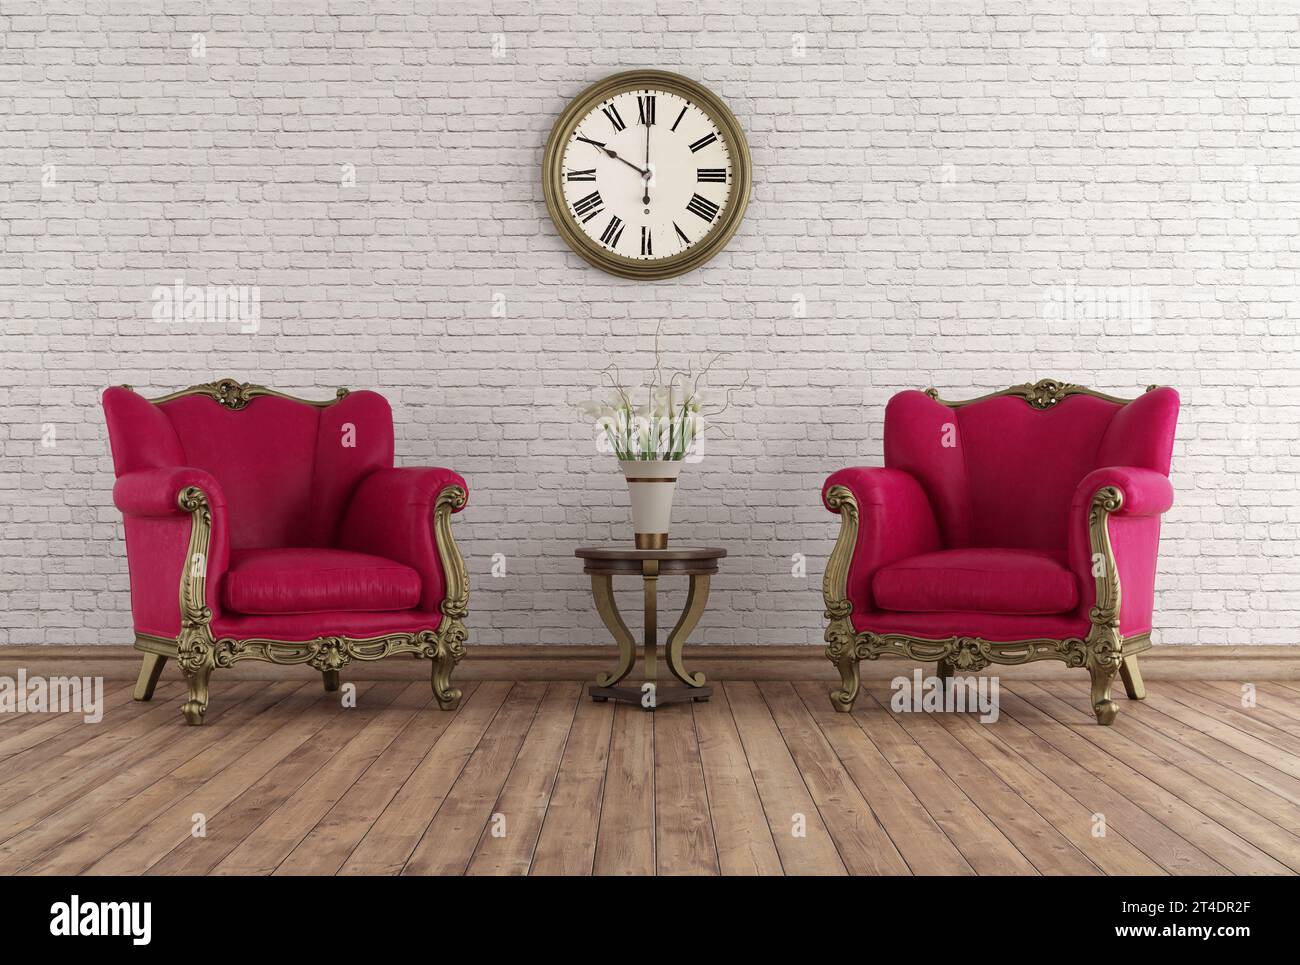 Old room with brick wall with luxury classic style armchairs on hardwood floor - 3d rendering Stock Photo